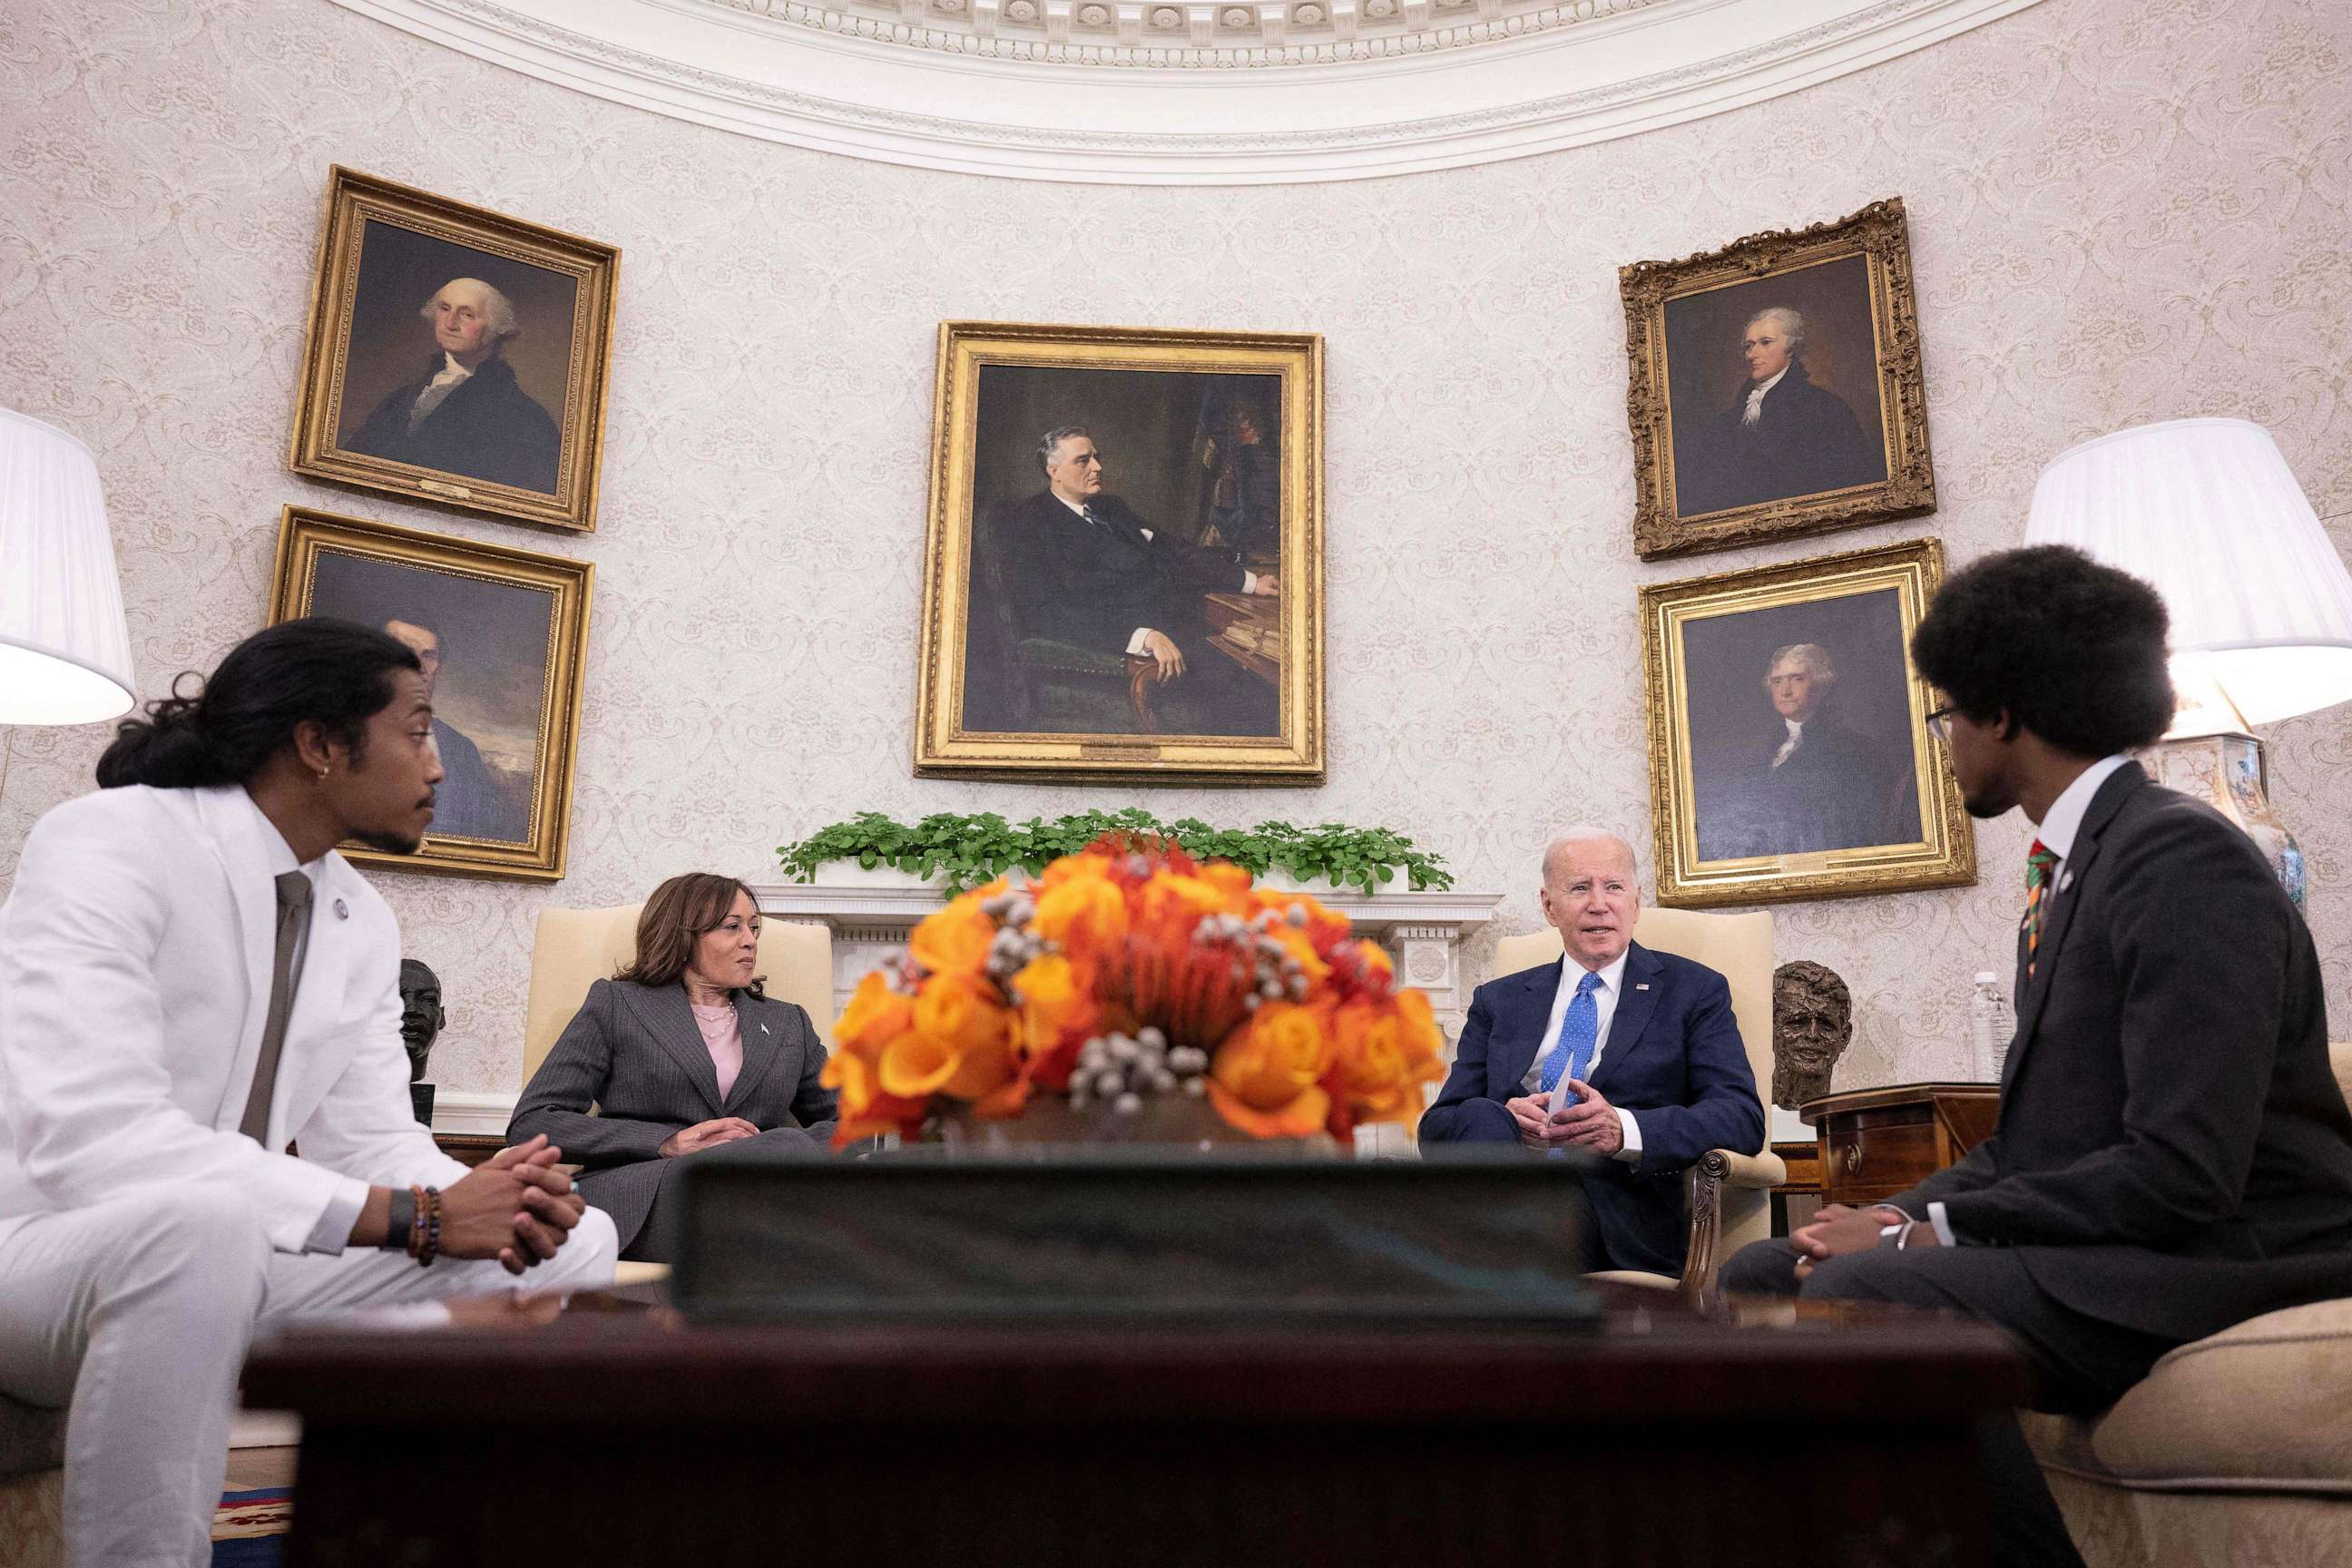 PHOTO: President Joe Biden meets with Tennessee Democrats expelled over gun control protest, Justin Jones and Justin Pearson, to discuss their efforts to ban assault weapons in the Oval Office, April 24, 2023.